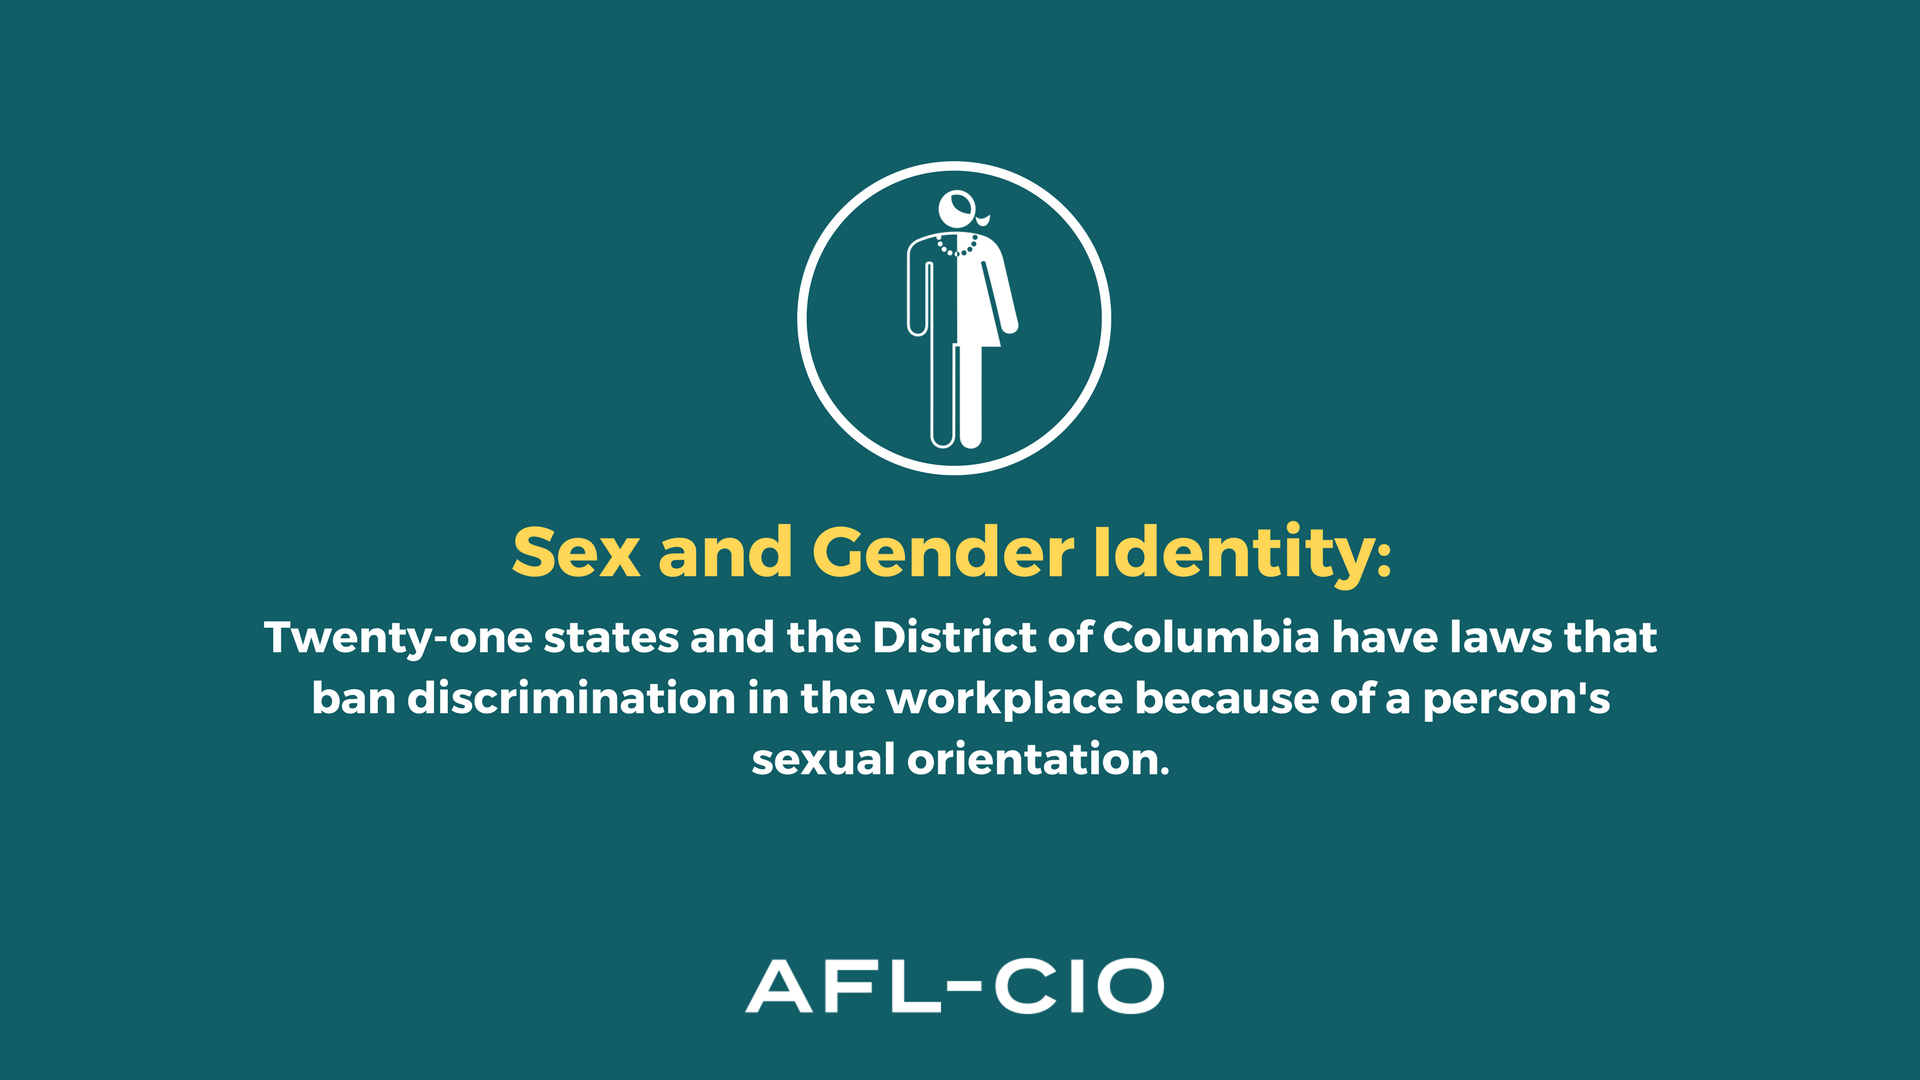 Sex and Gender Identity: 21 states and the District of Columbia have laws that ban discrimination in the workplace because of person's sexual orientation.